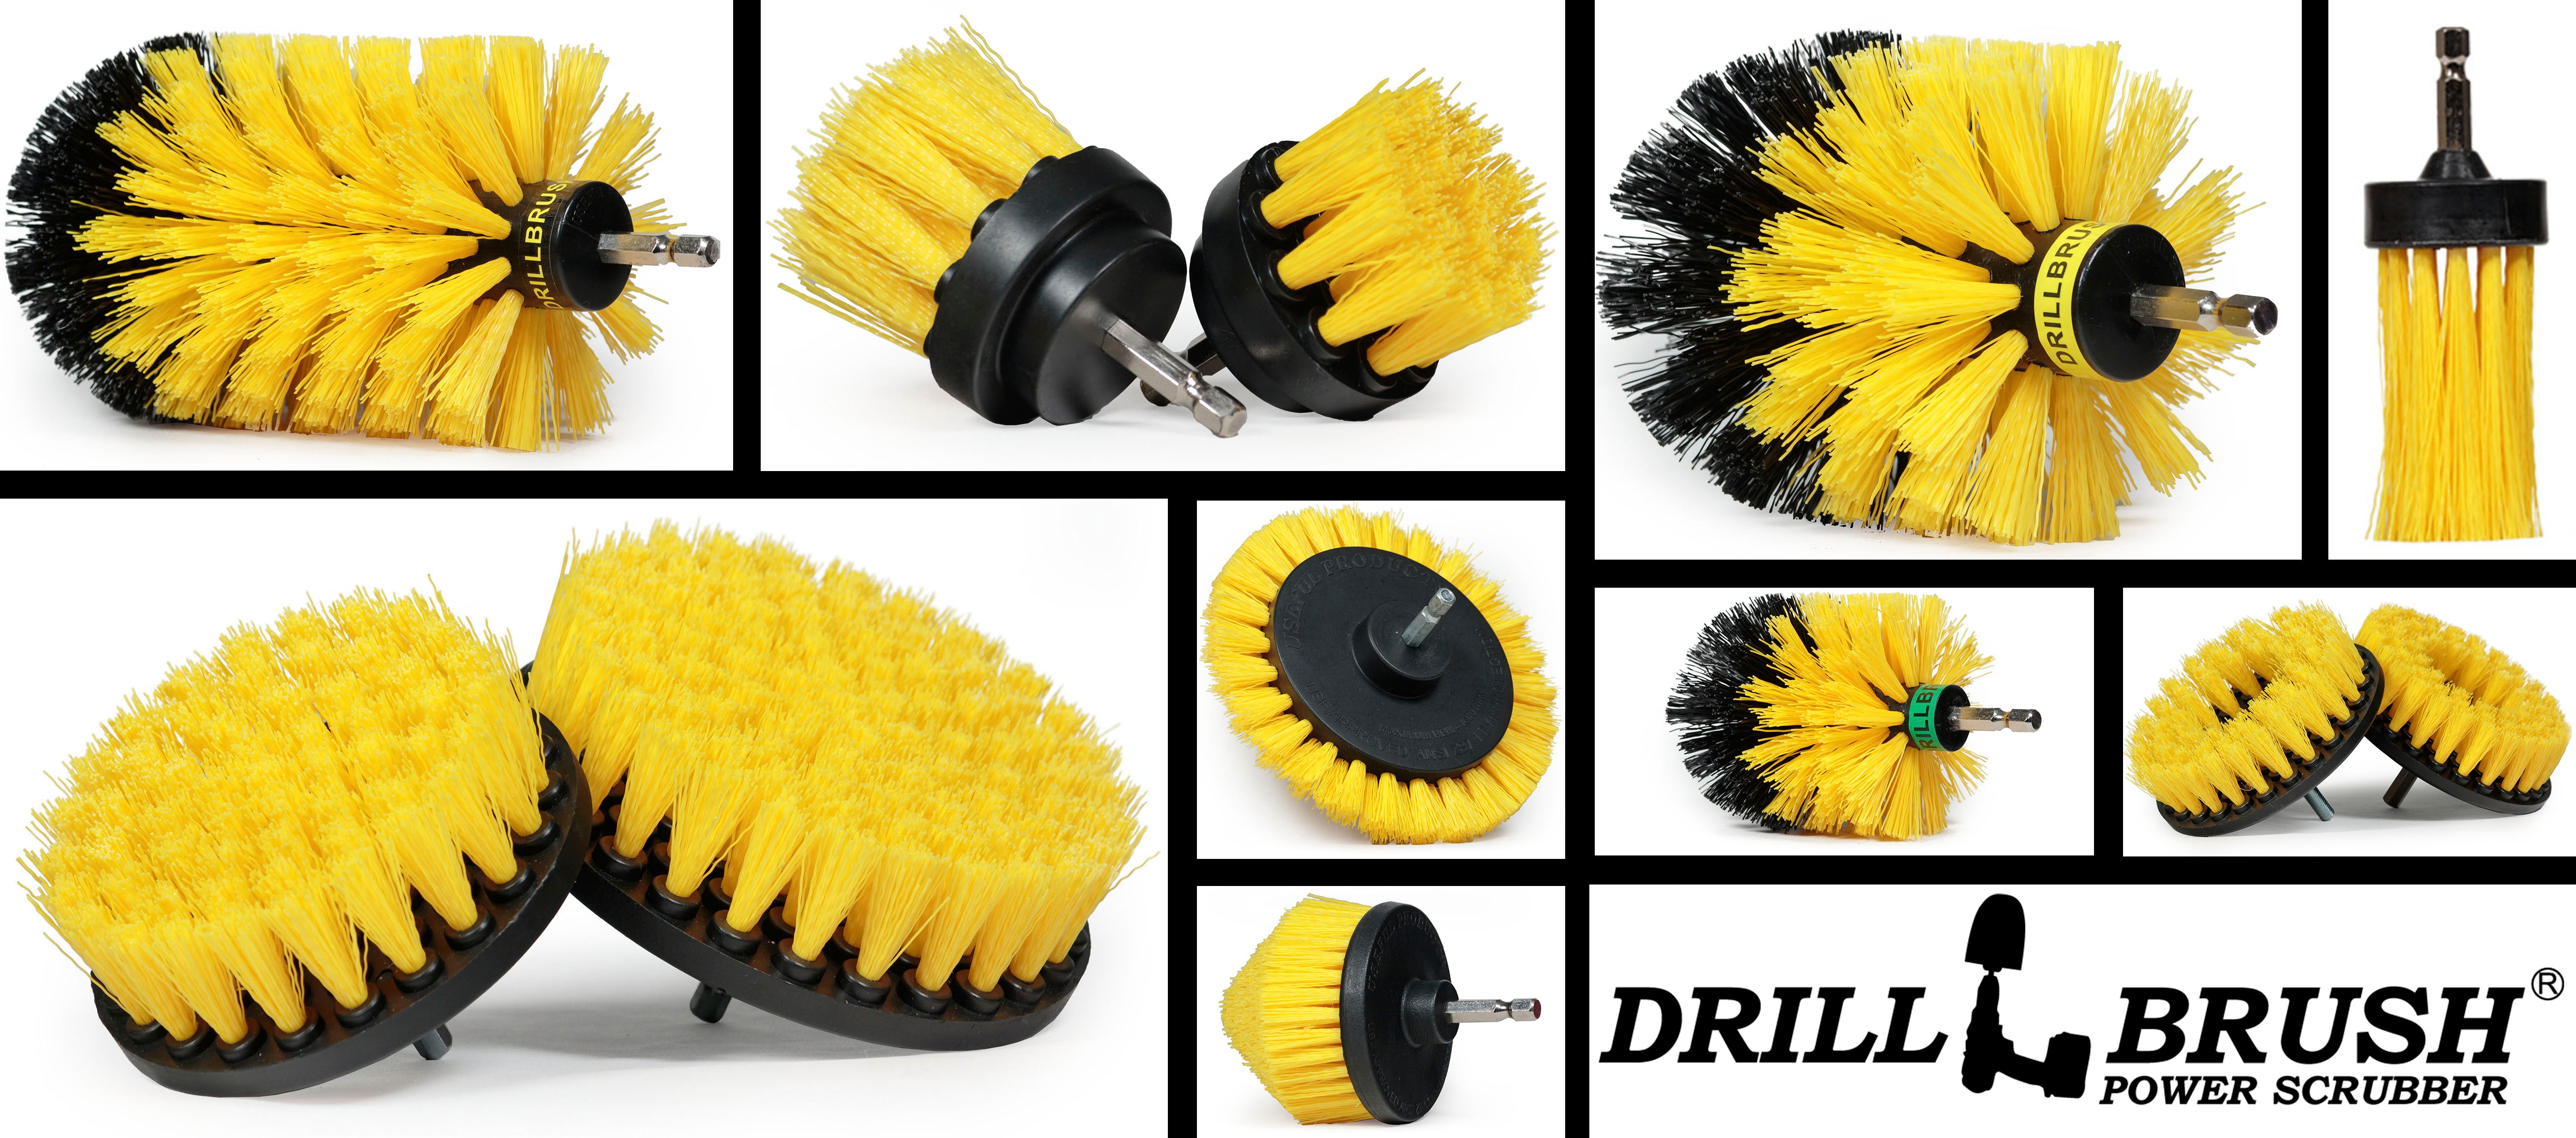 What's the Difference Between Each Drillbrush Shape?